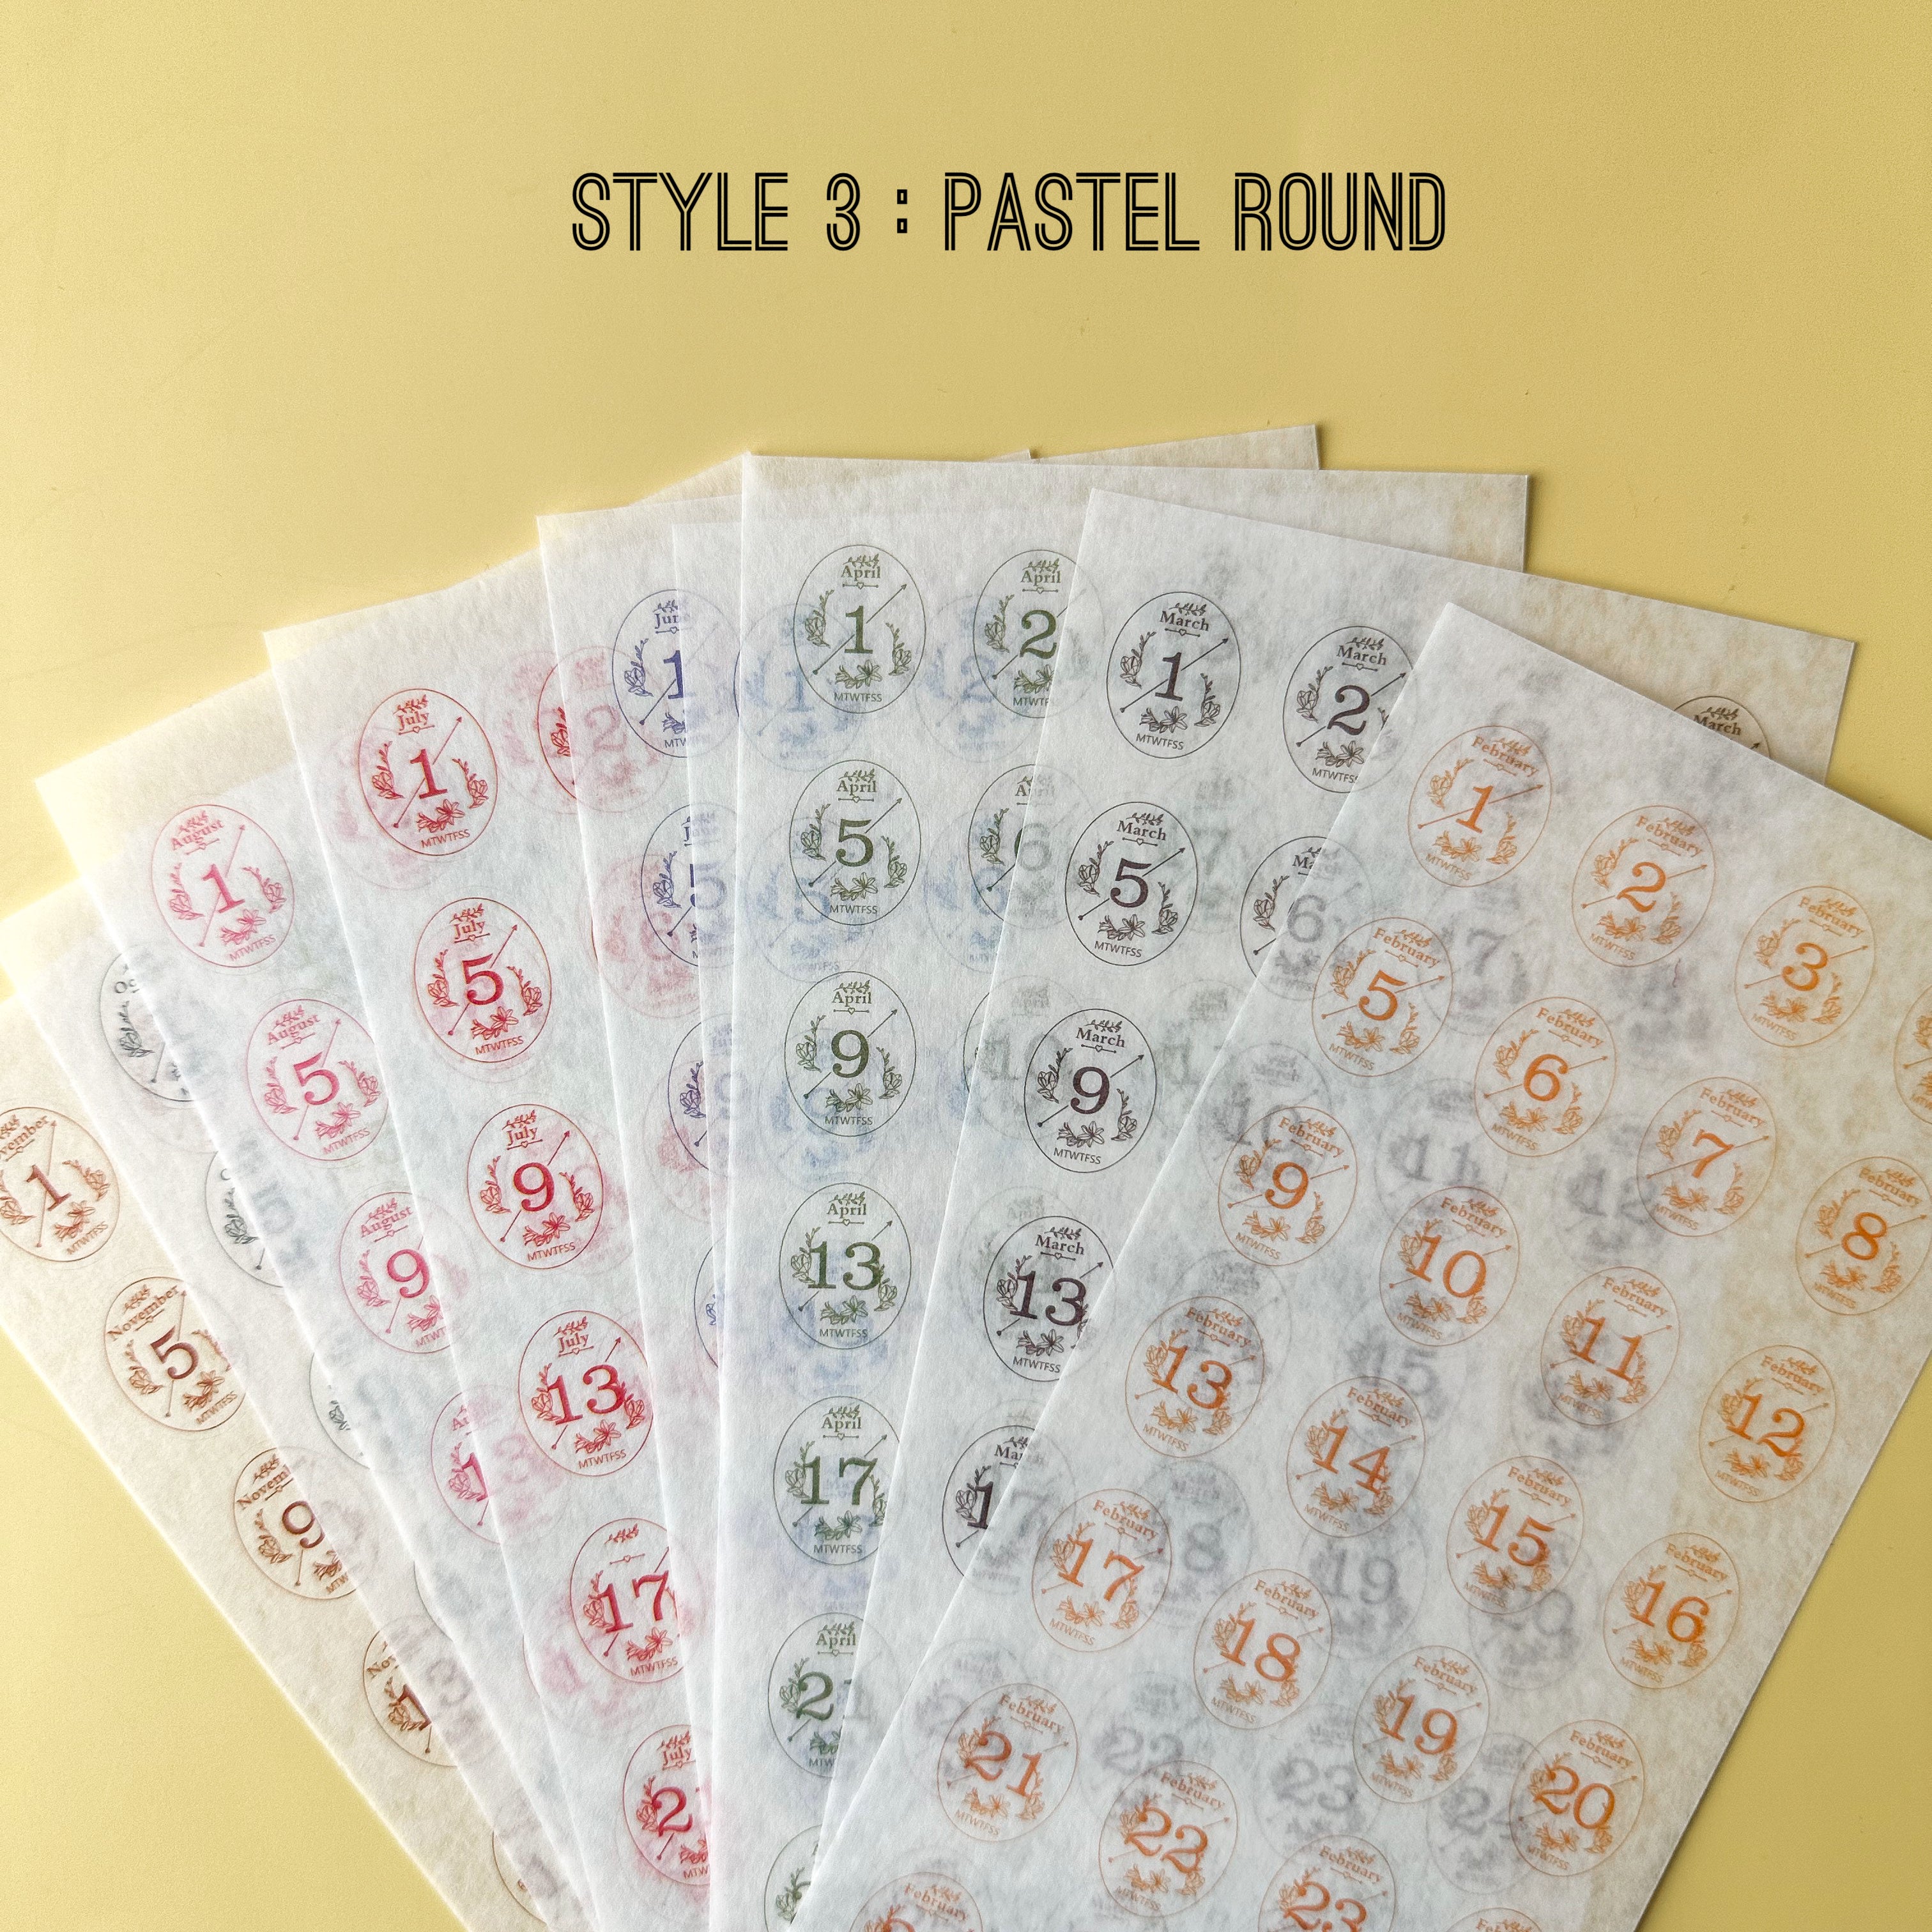 These are pre-dated pastel color monthly stickers for your monthly planner or BUJO spreads. These stickers are sold at BBB Supplies Craft Shop.